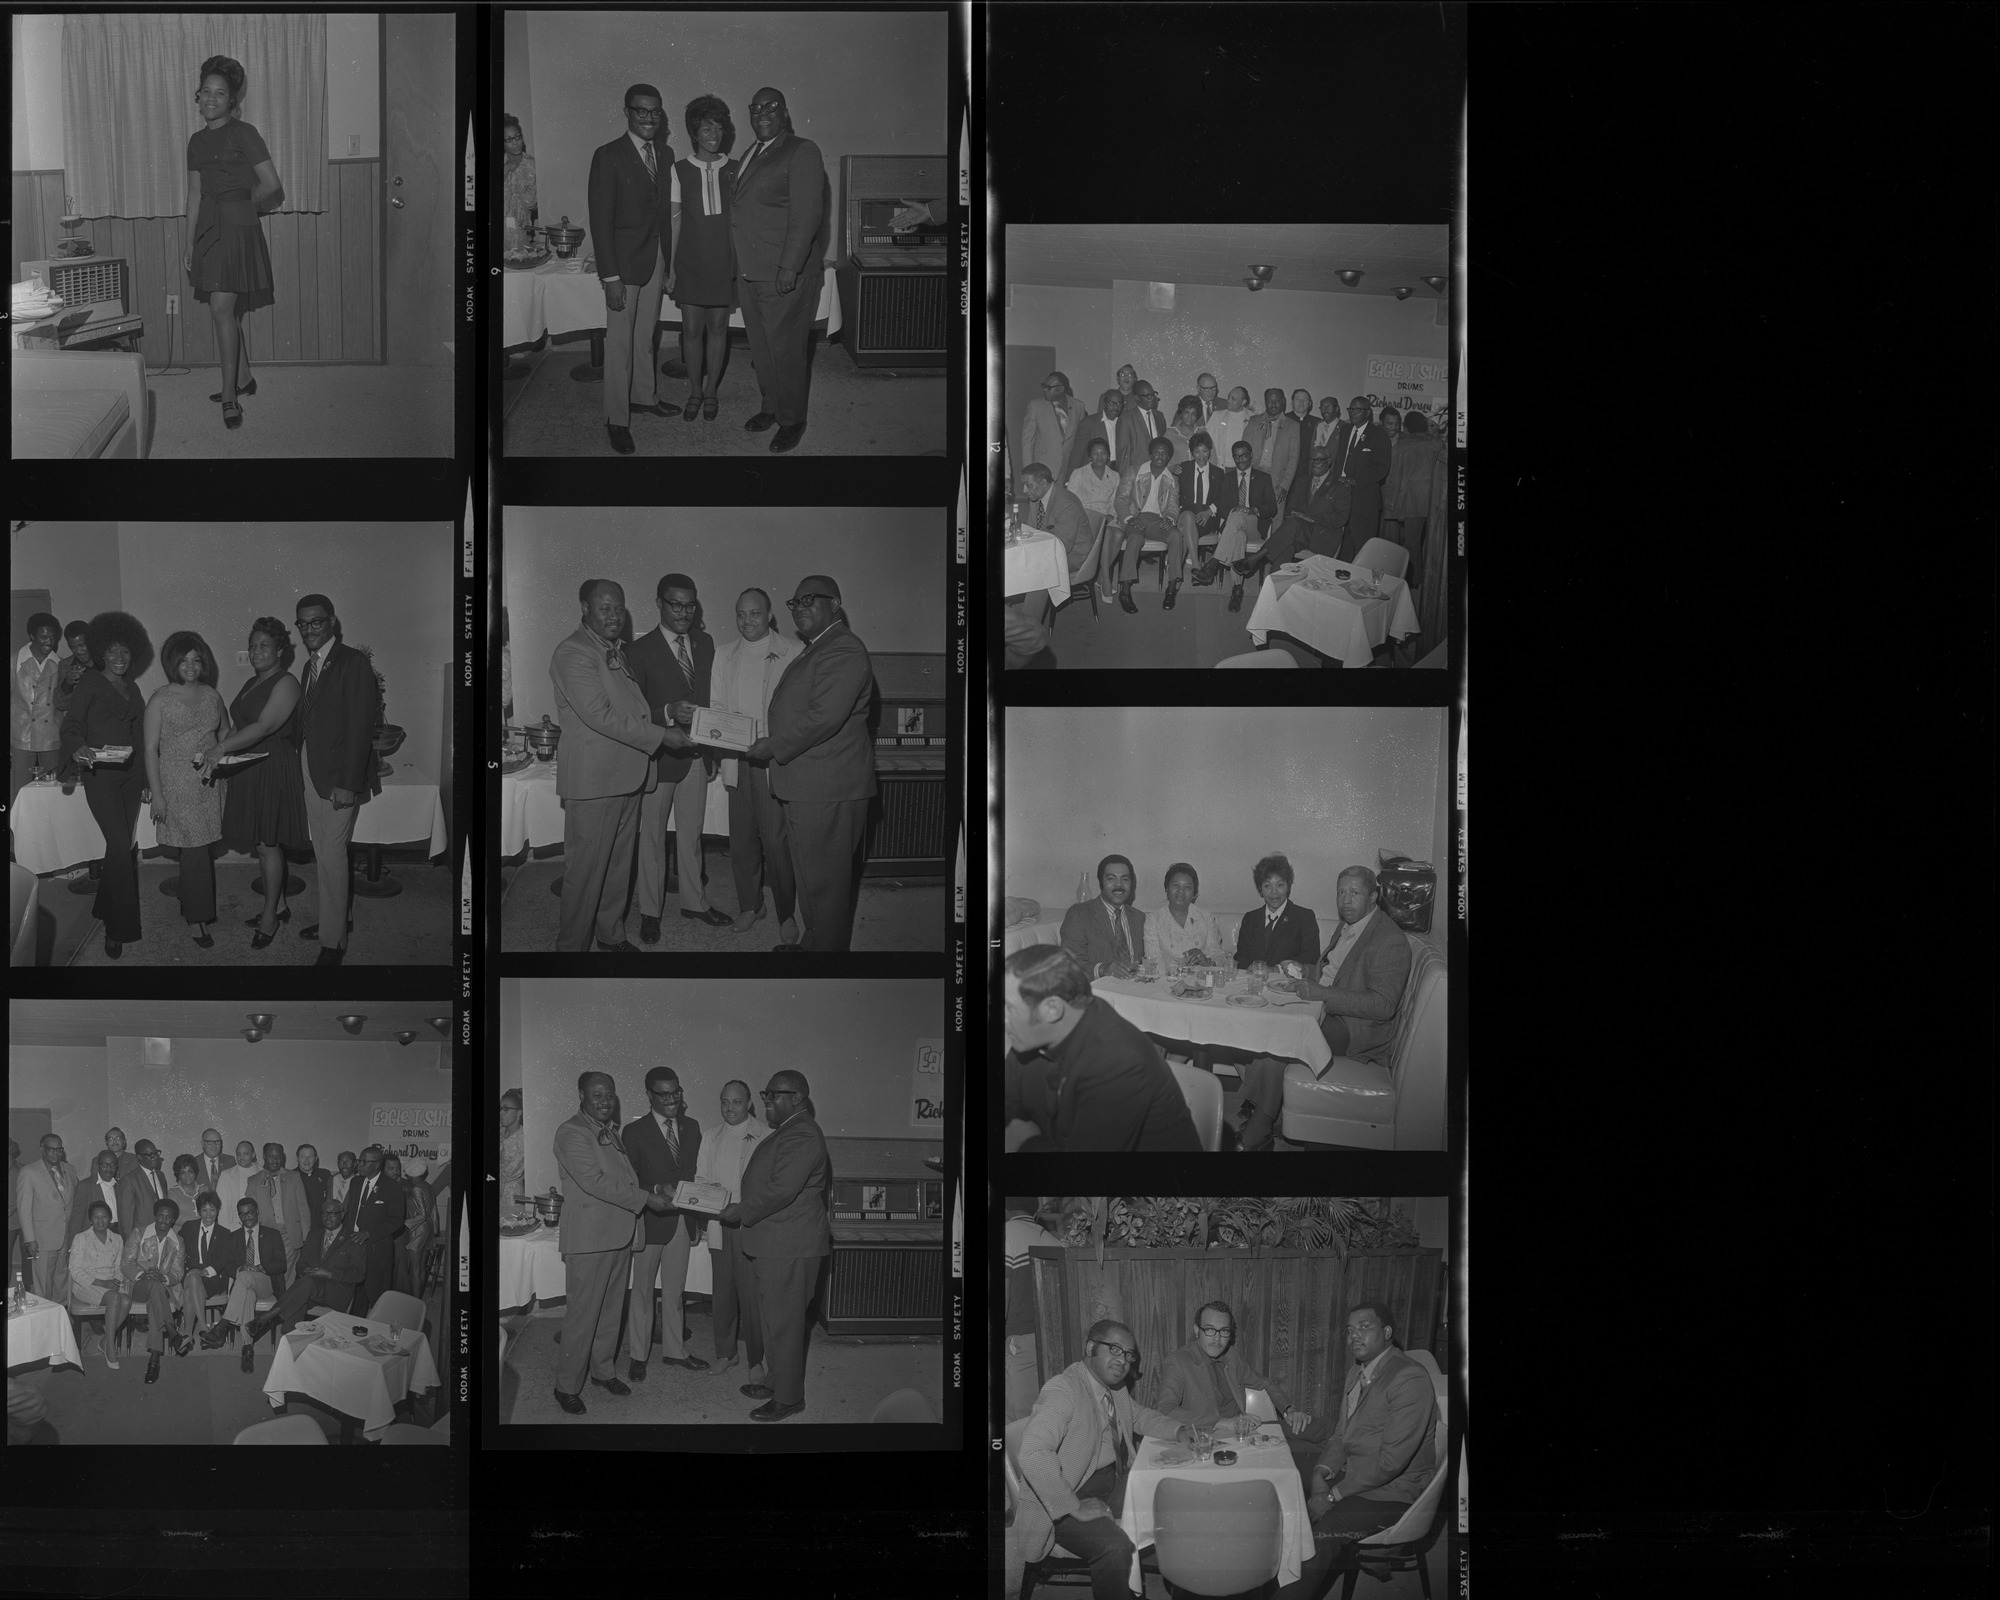 Set of negatives by Clinton Wright including Ray Feaster & Regina, graduating class at SNMH (C.E.P.), NAACP installation at Ruben's, and Brenda McKinney,  1971, page 2